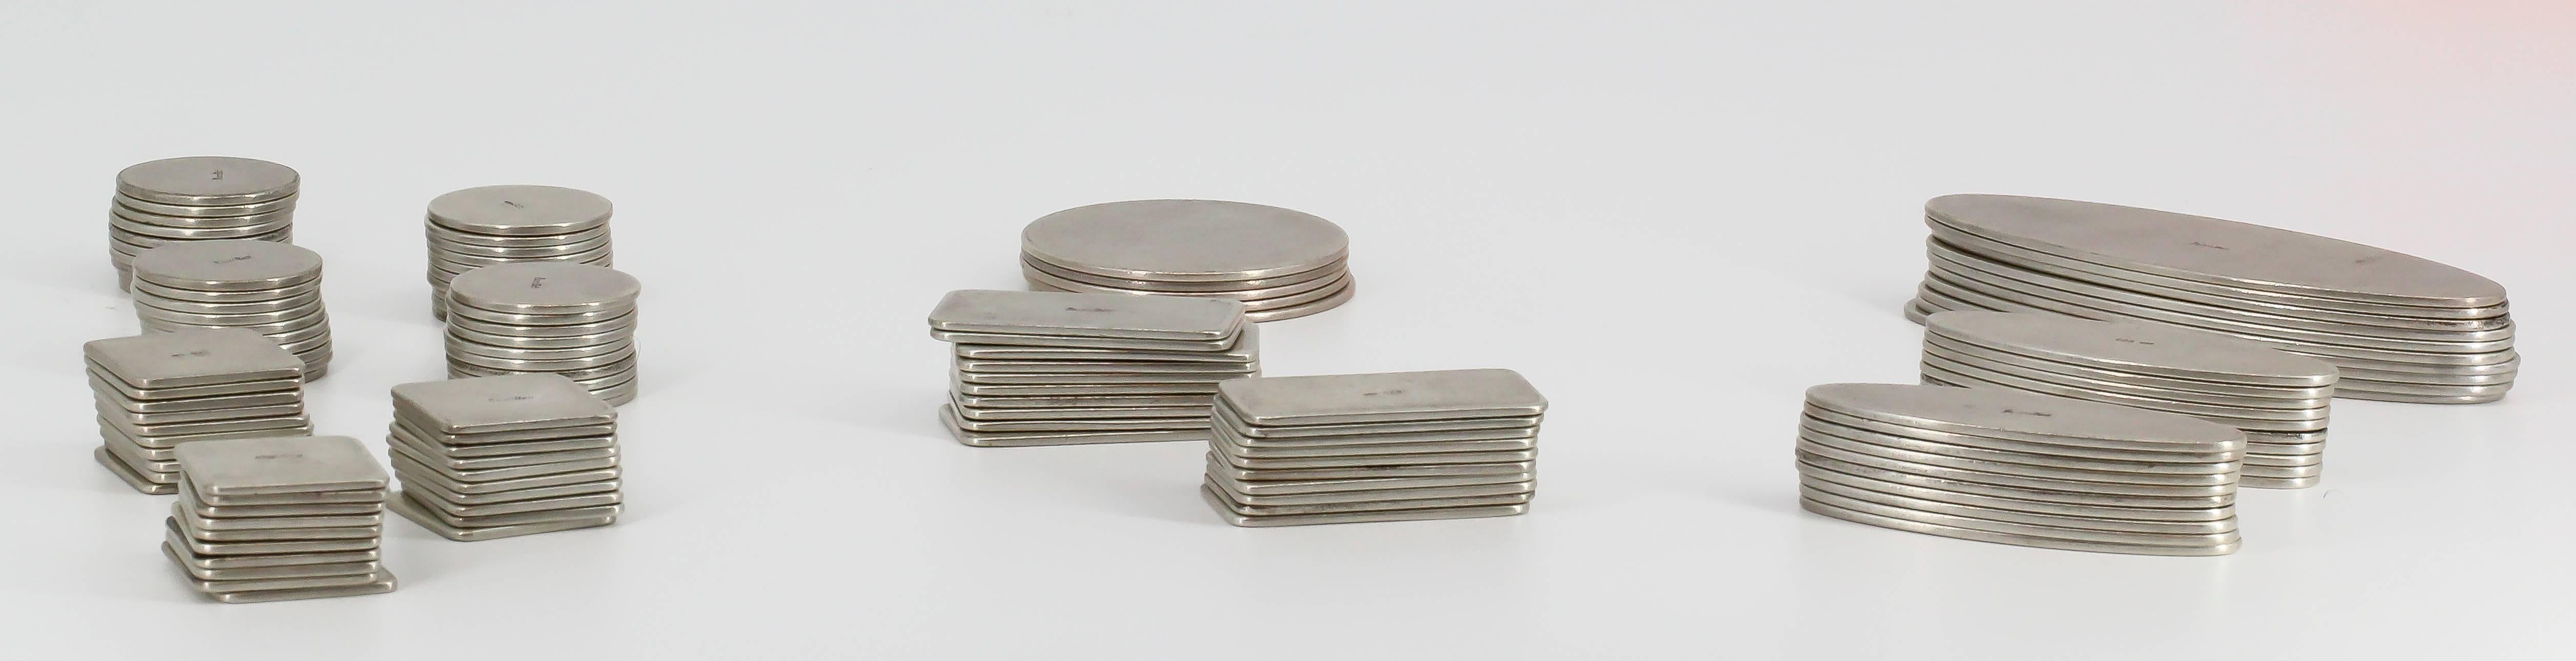 Rare and unusual sterling silver chip set by Buccellati. It features various sizes and shapes of chips for roulette playing or a variety of other games such as poker, etc... 125 total chips.  An interesting gift for an interesting man.

Hallmarks: